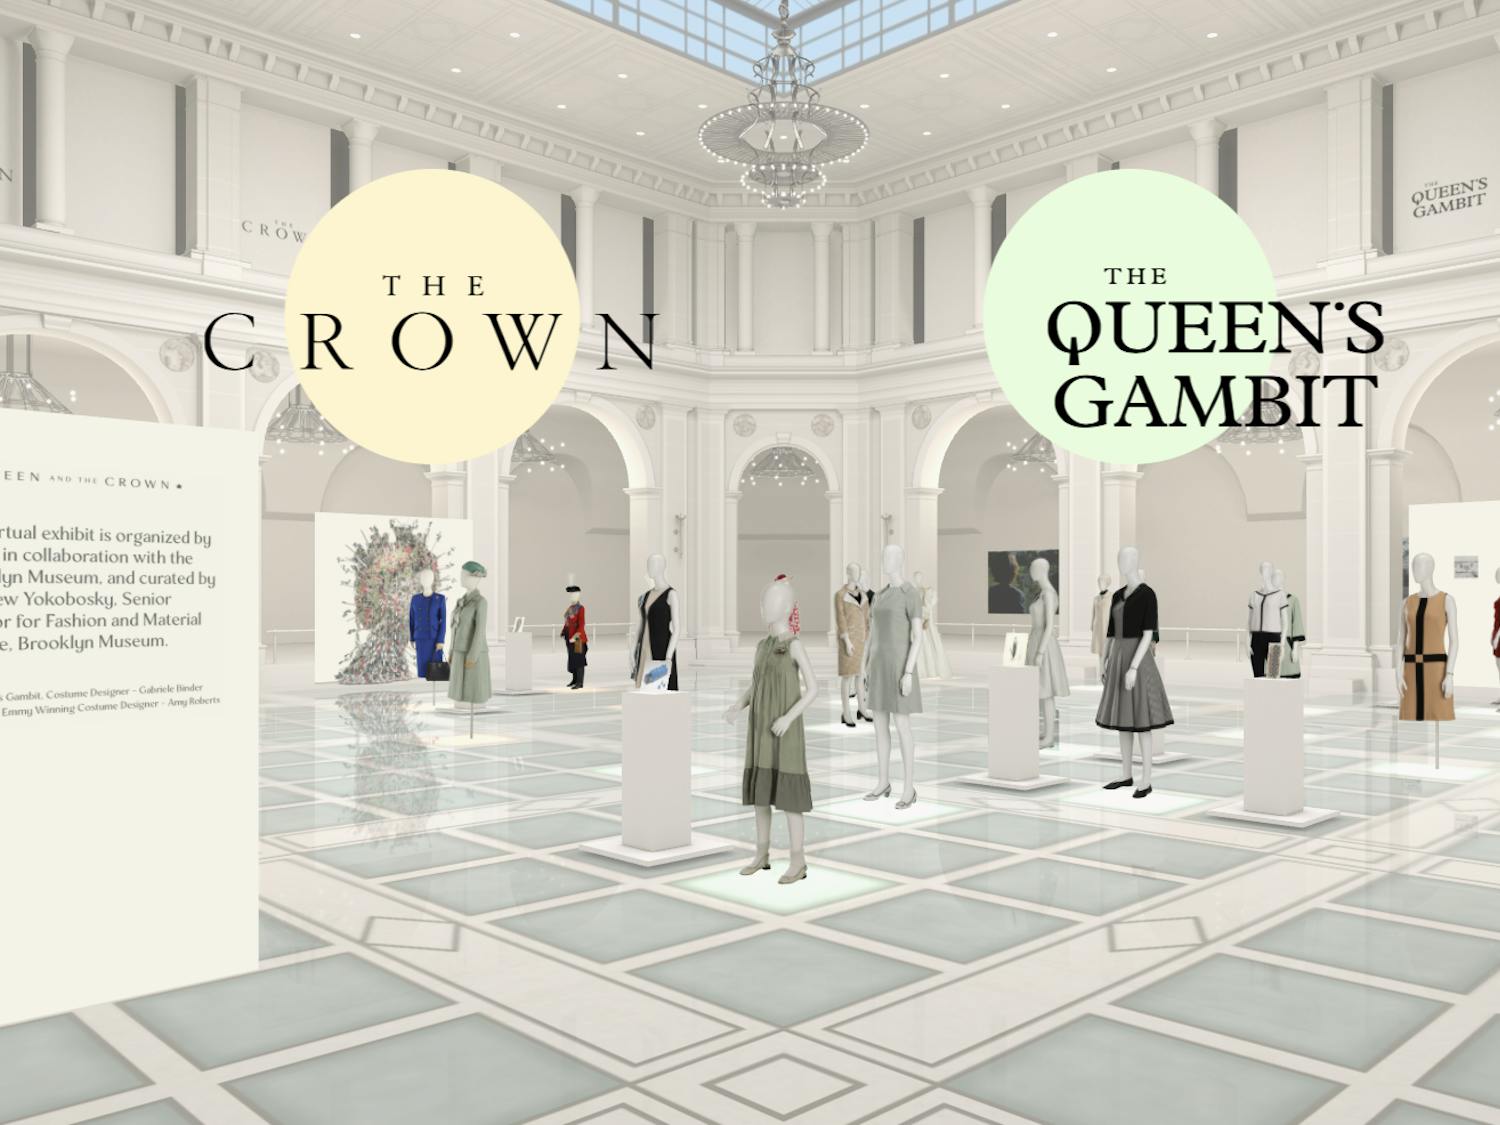 You can virtually browse through the costumes from "The Crown" and "The Queen's Gambit" 